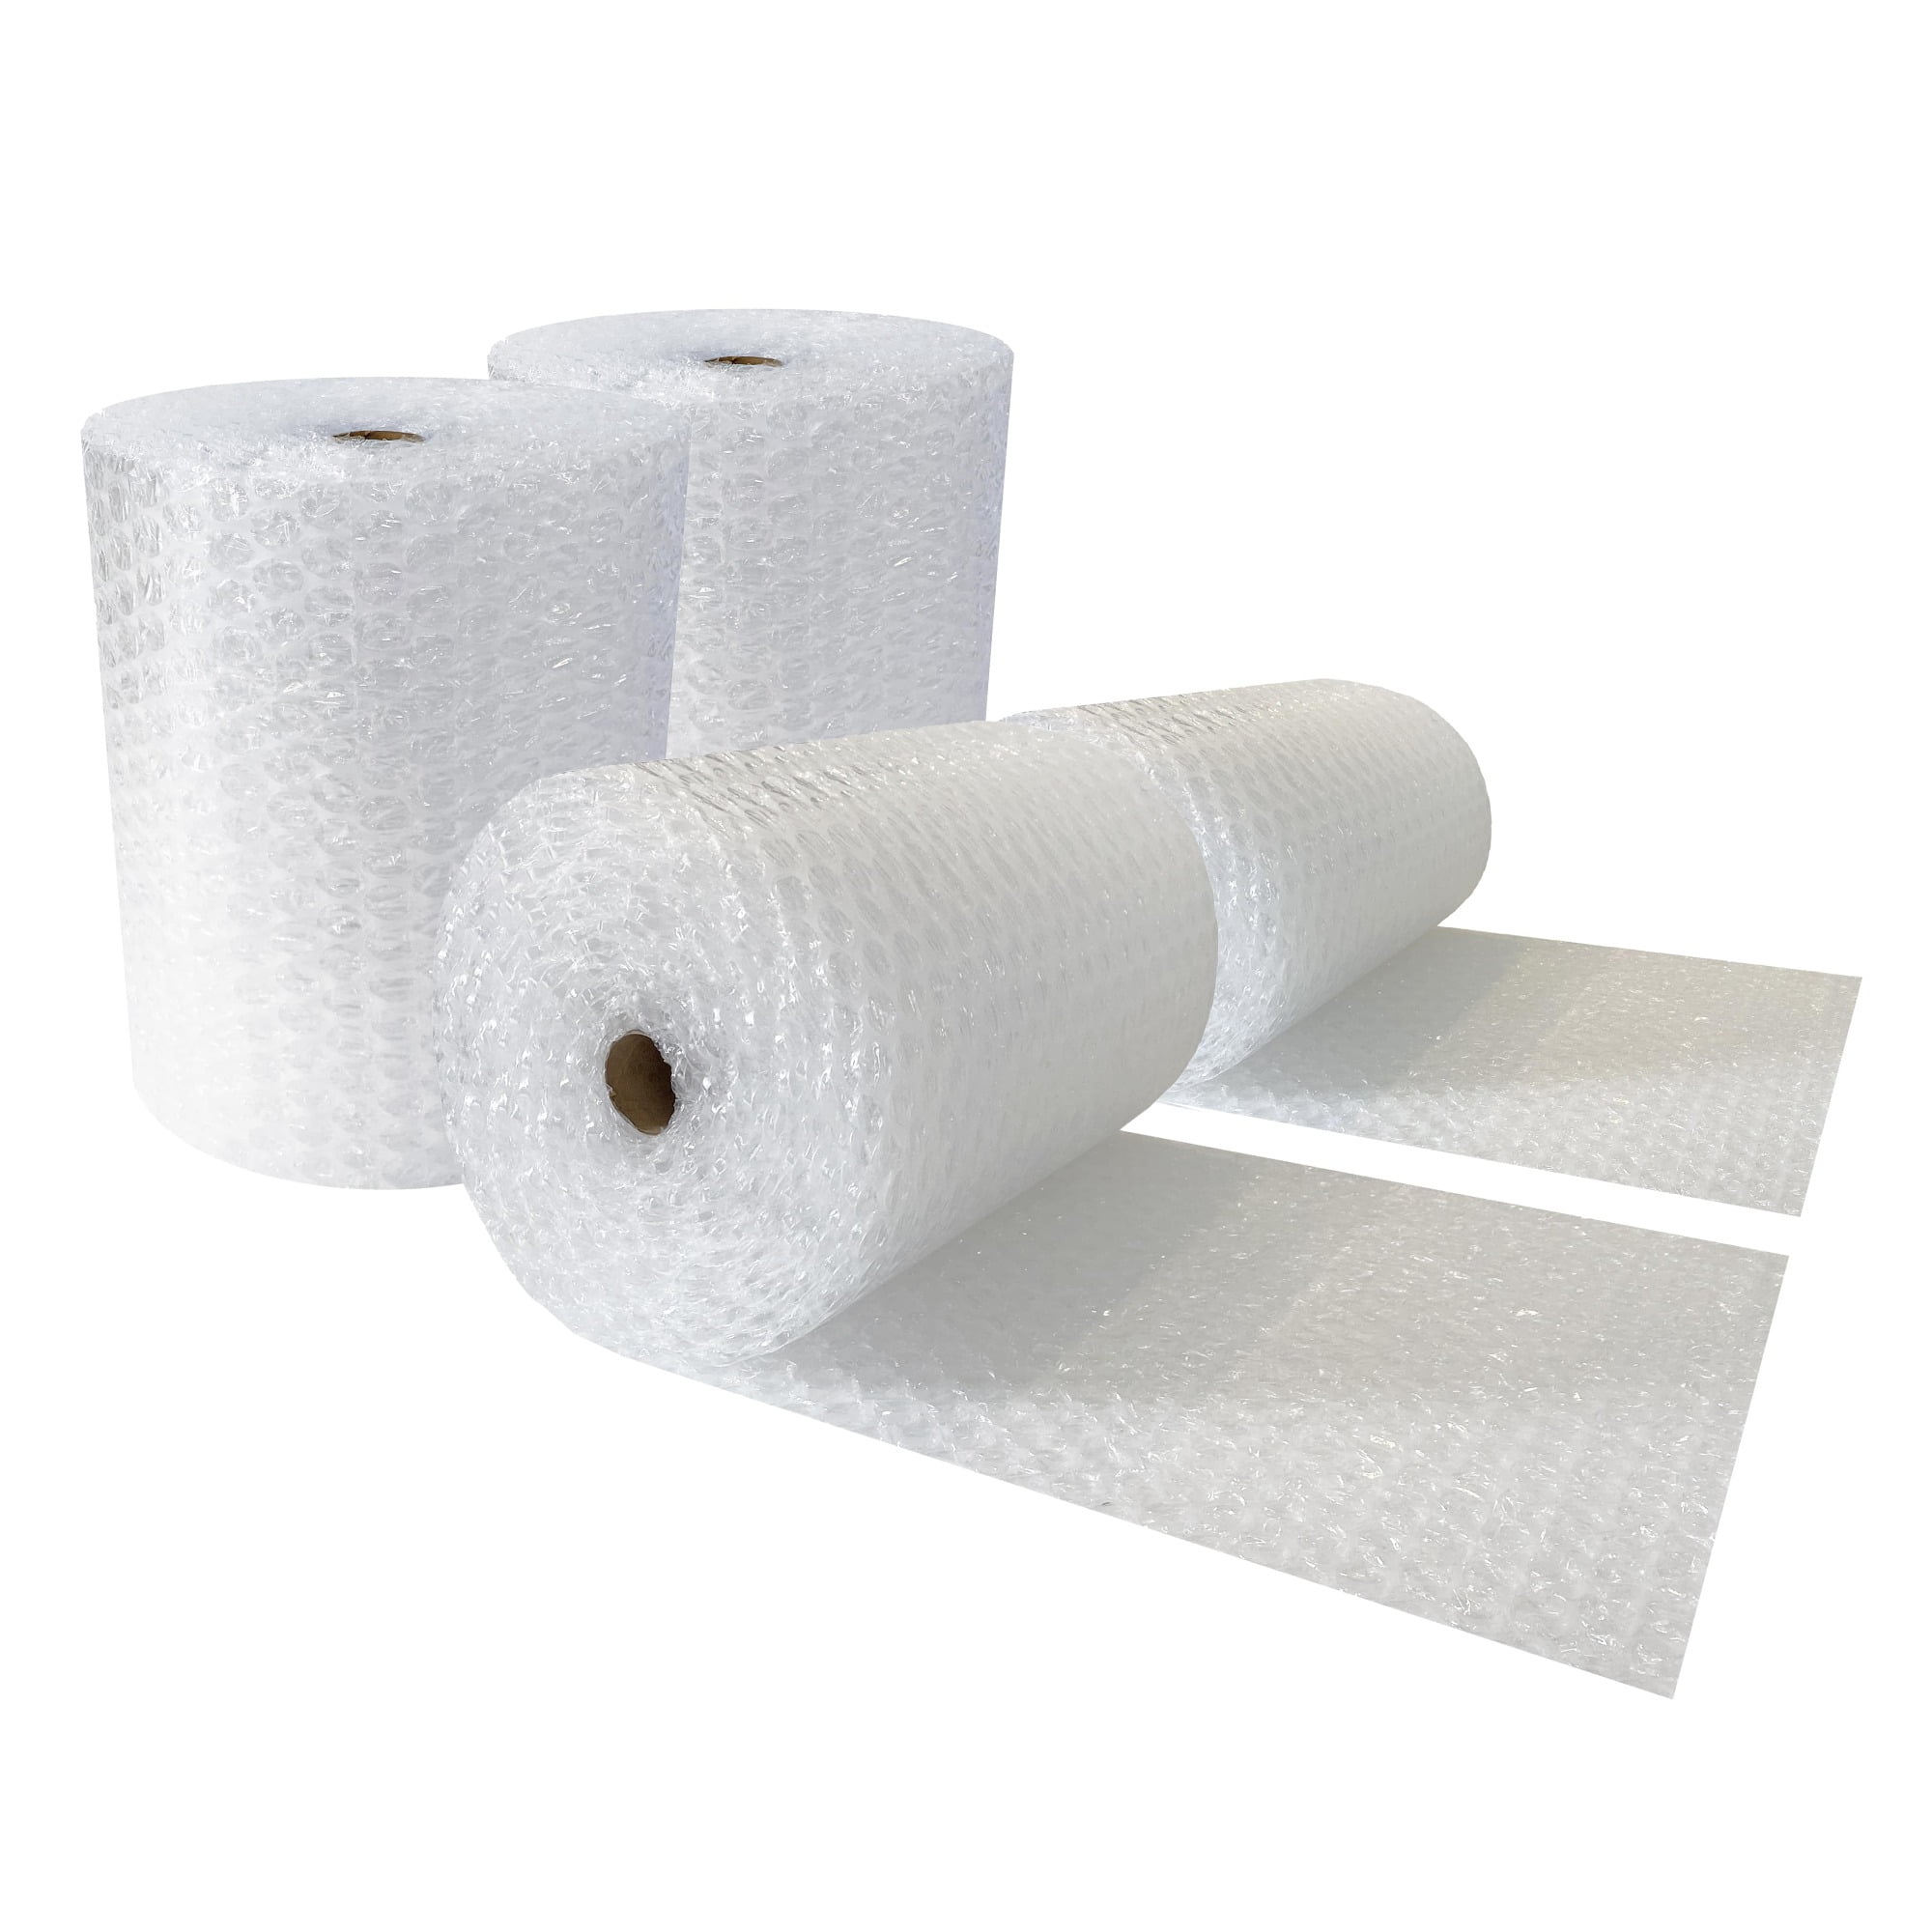 TOTALPACK® Air Cushioning Bubble Wrap Rolls - Cushioning & Foam - Packaging  materials - TOTALPACK Products